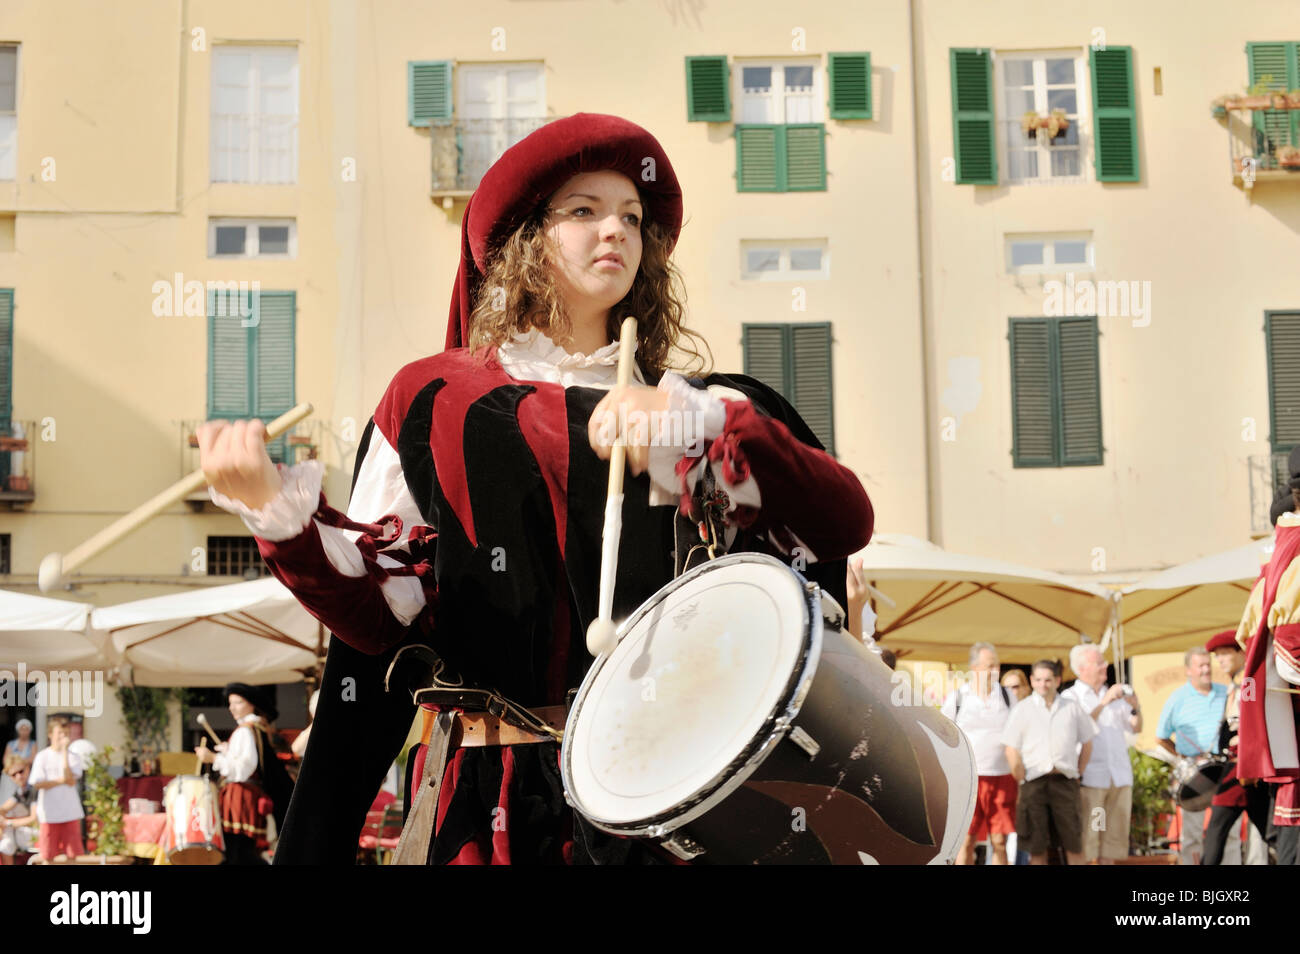 Italian city of Lucca. Young local woman drummer in mediaeval costume street pageant festival. Tuscany, Italy Stock Photo